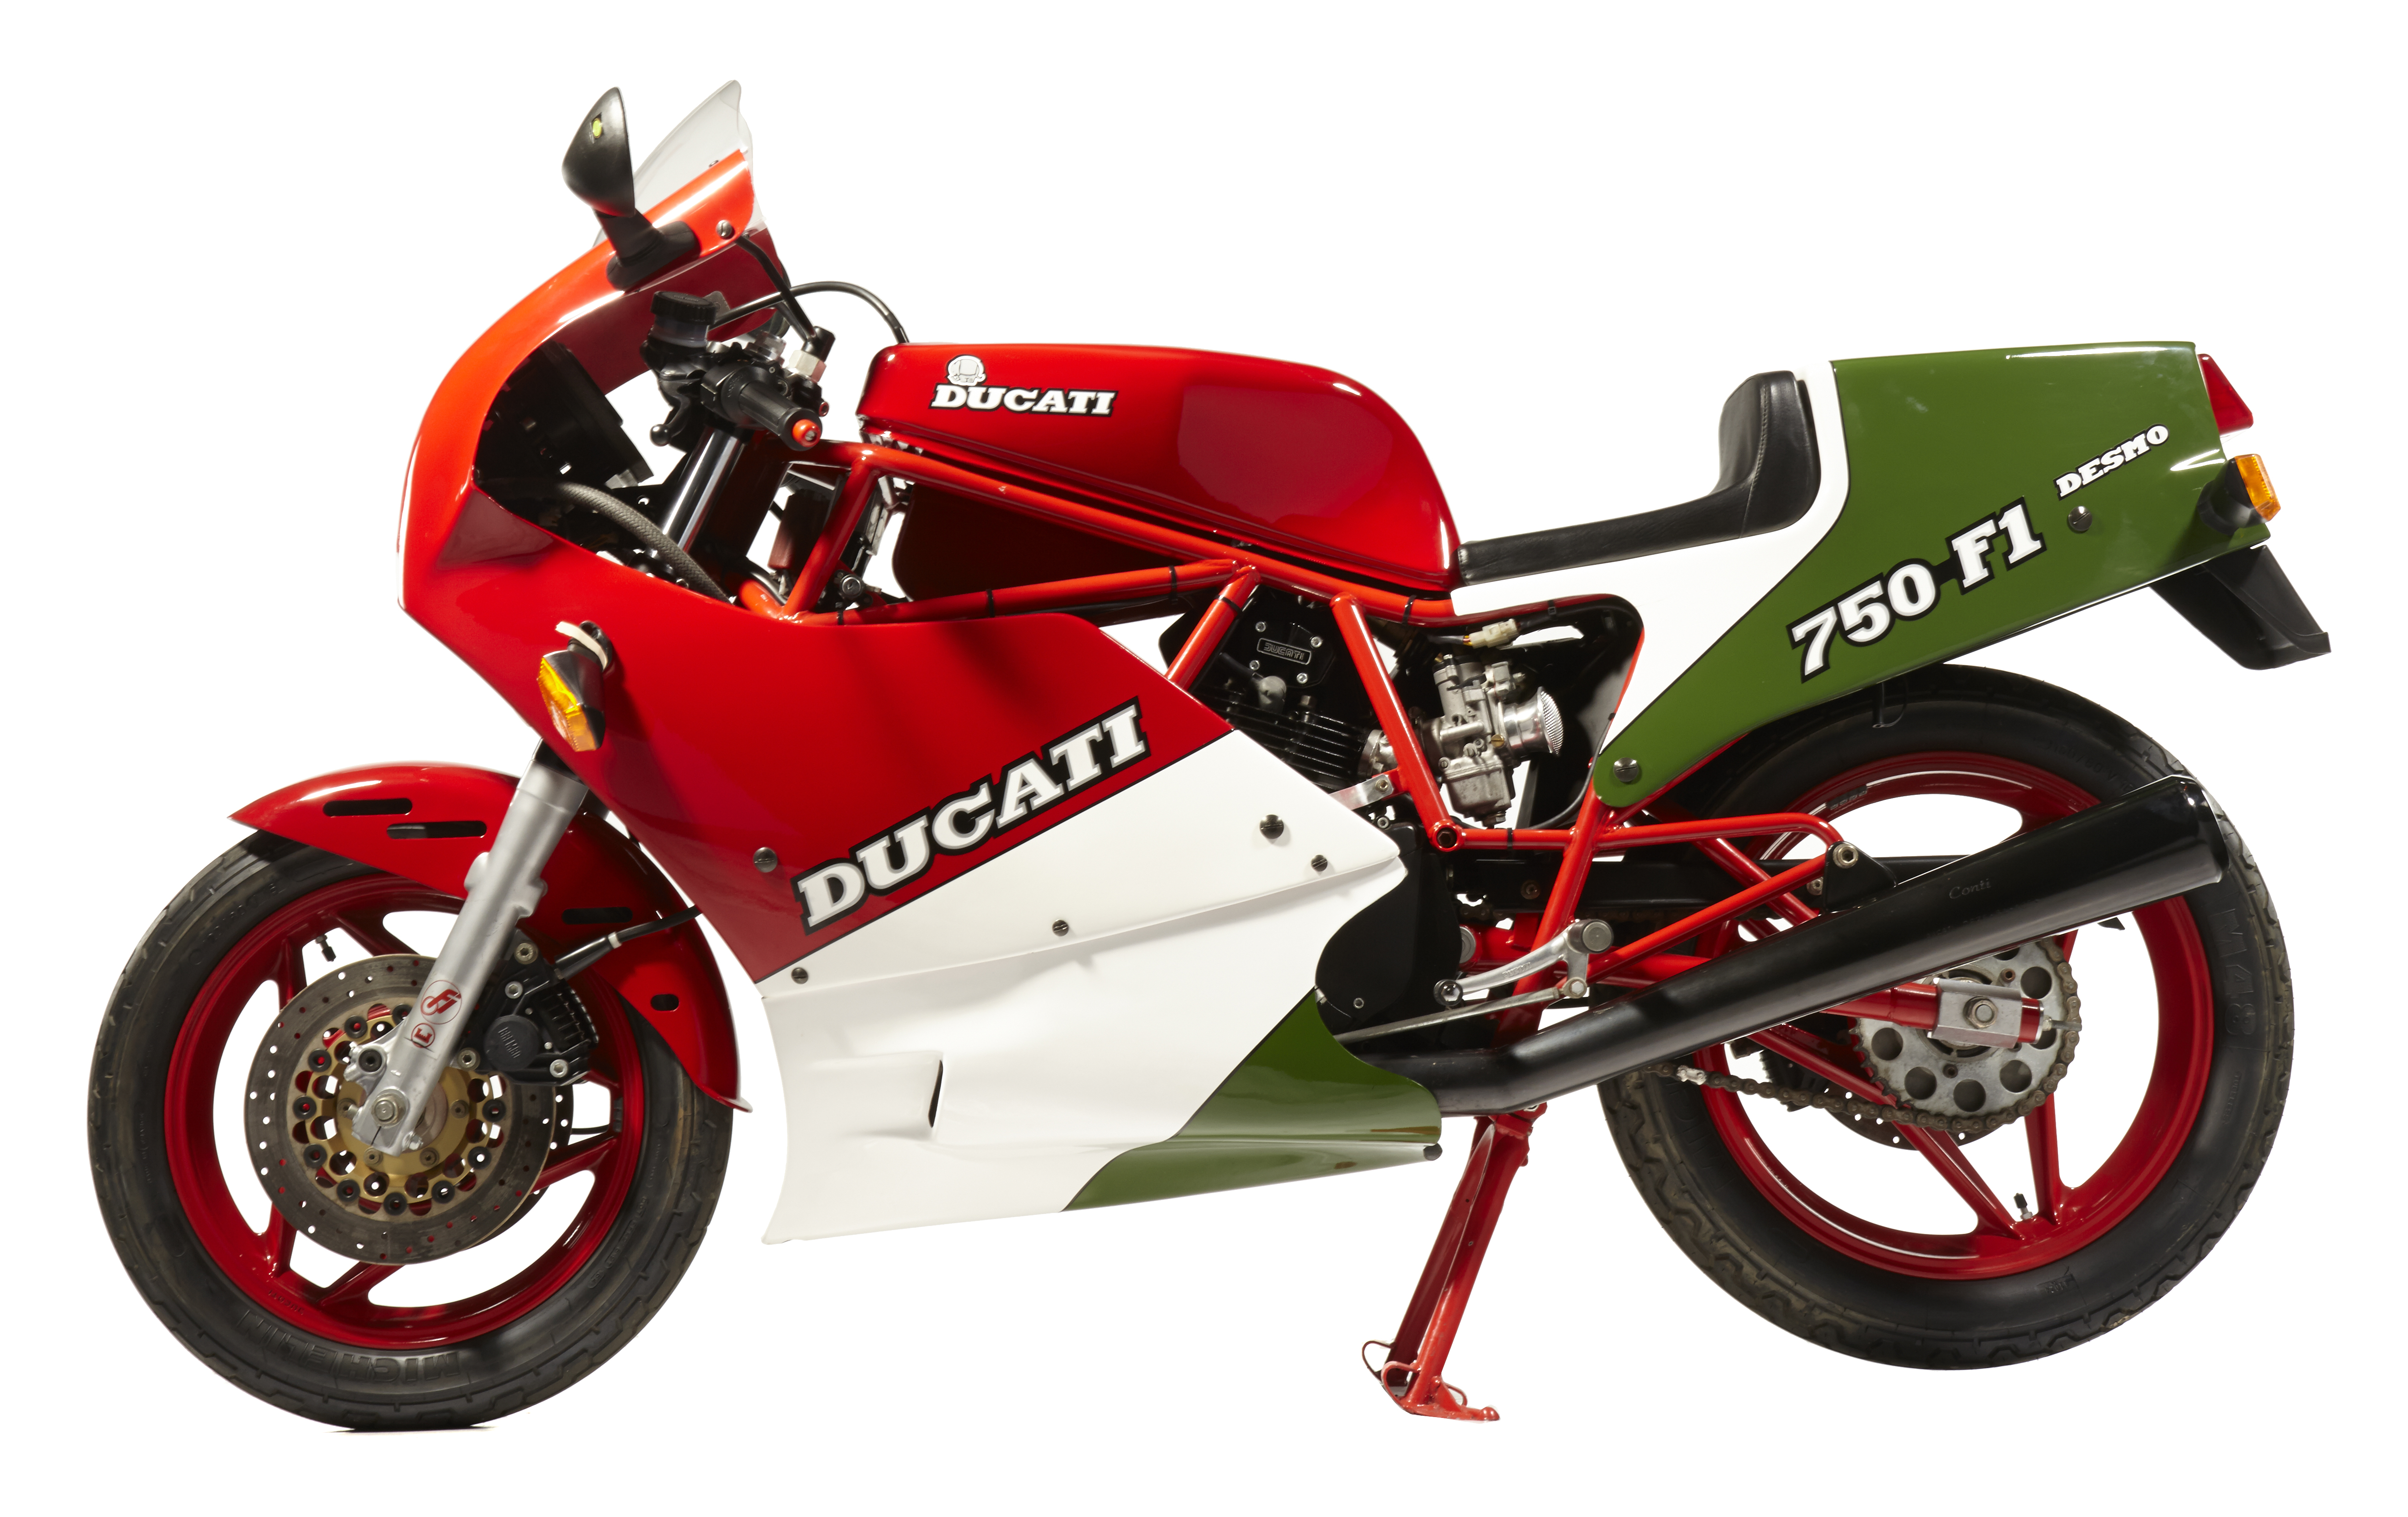 Ultra-rare Ducati collection up for auction